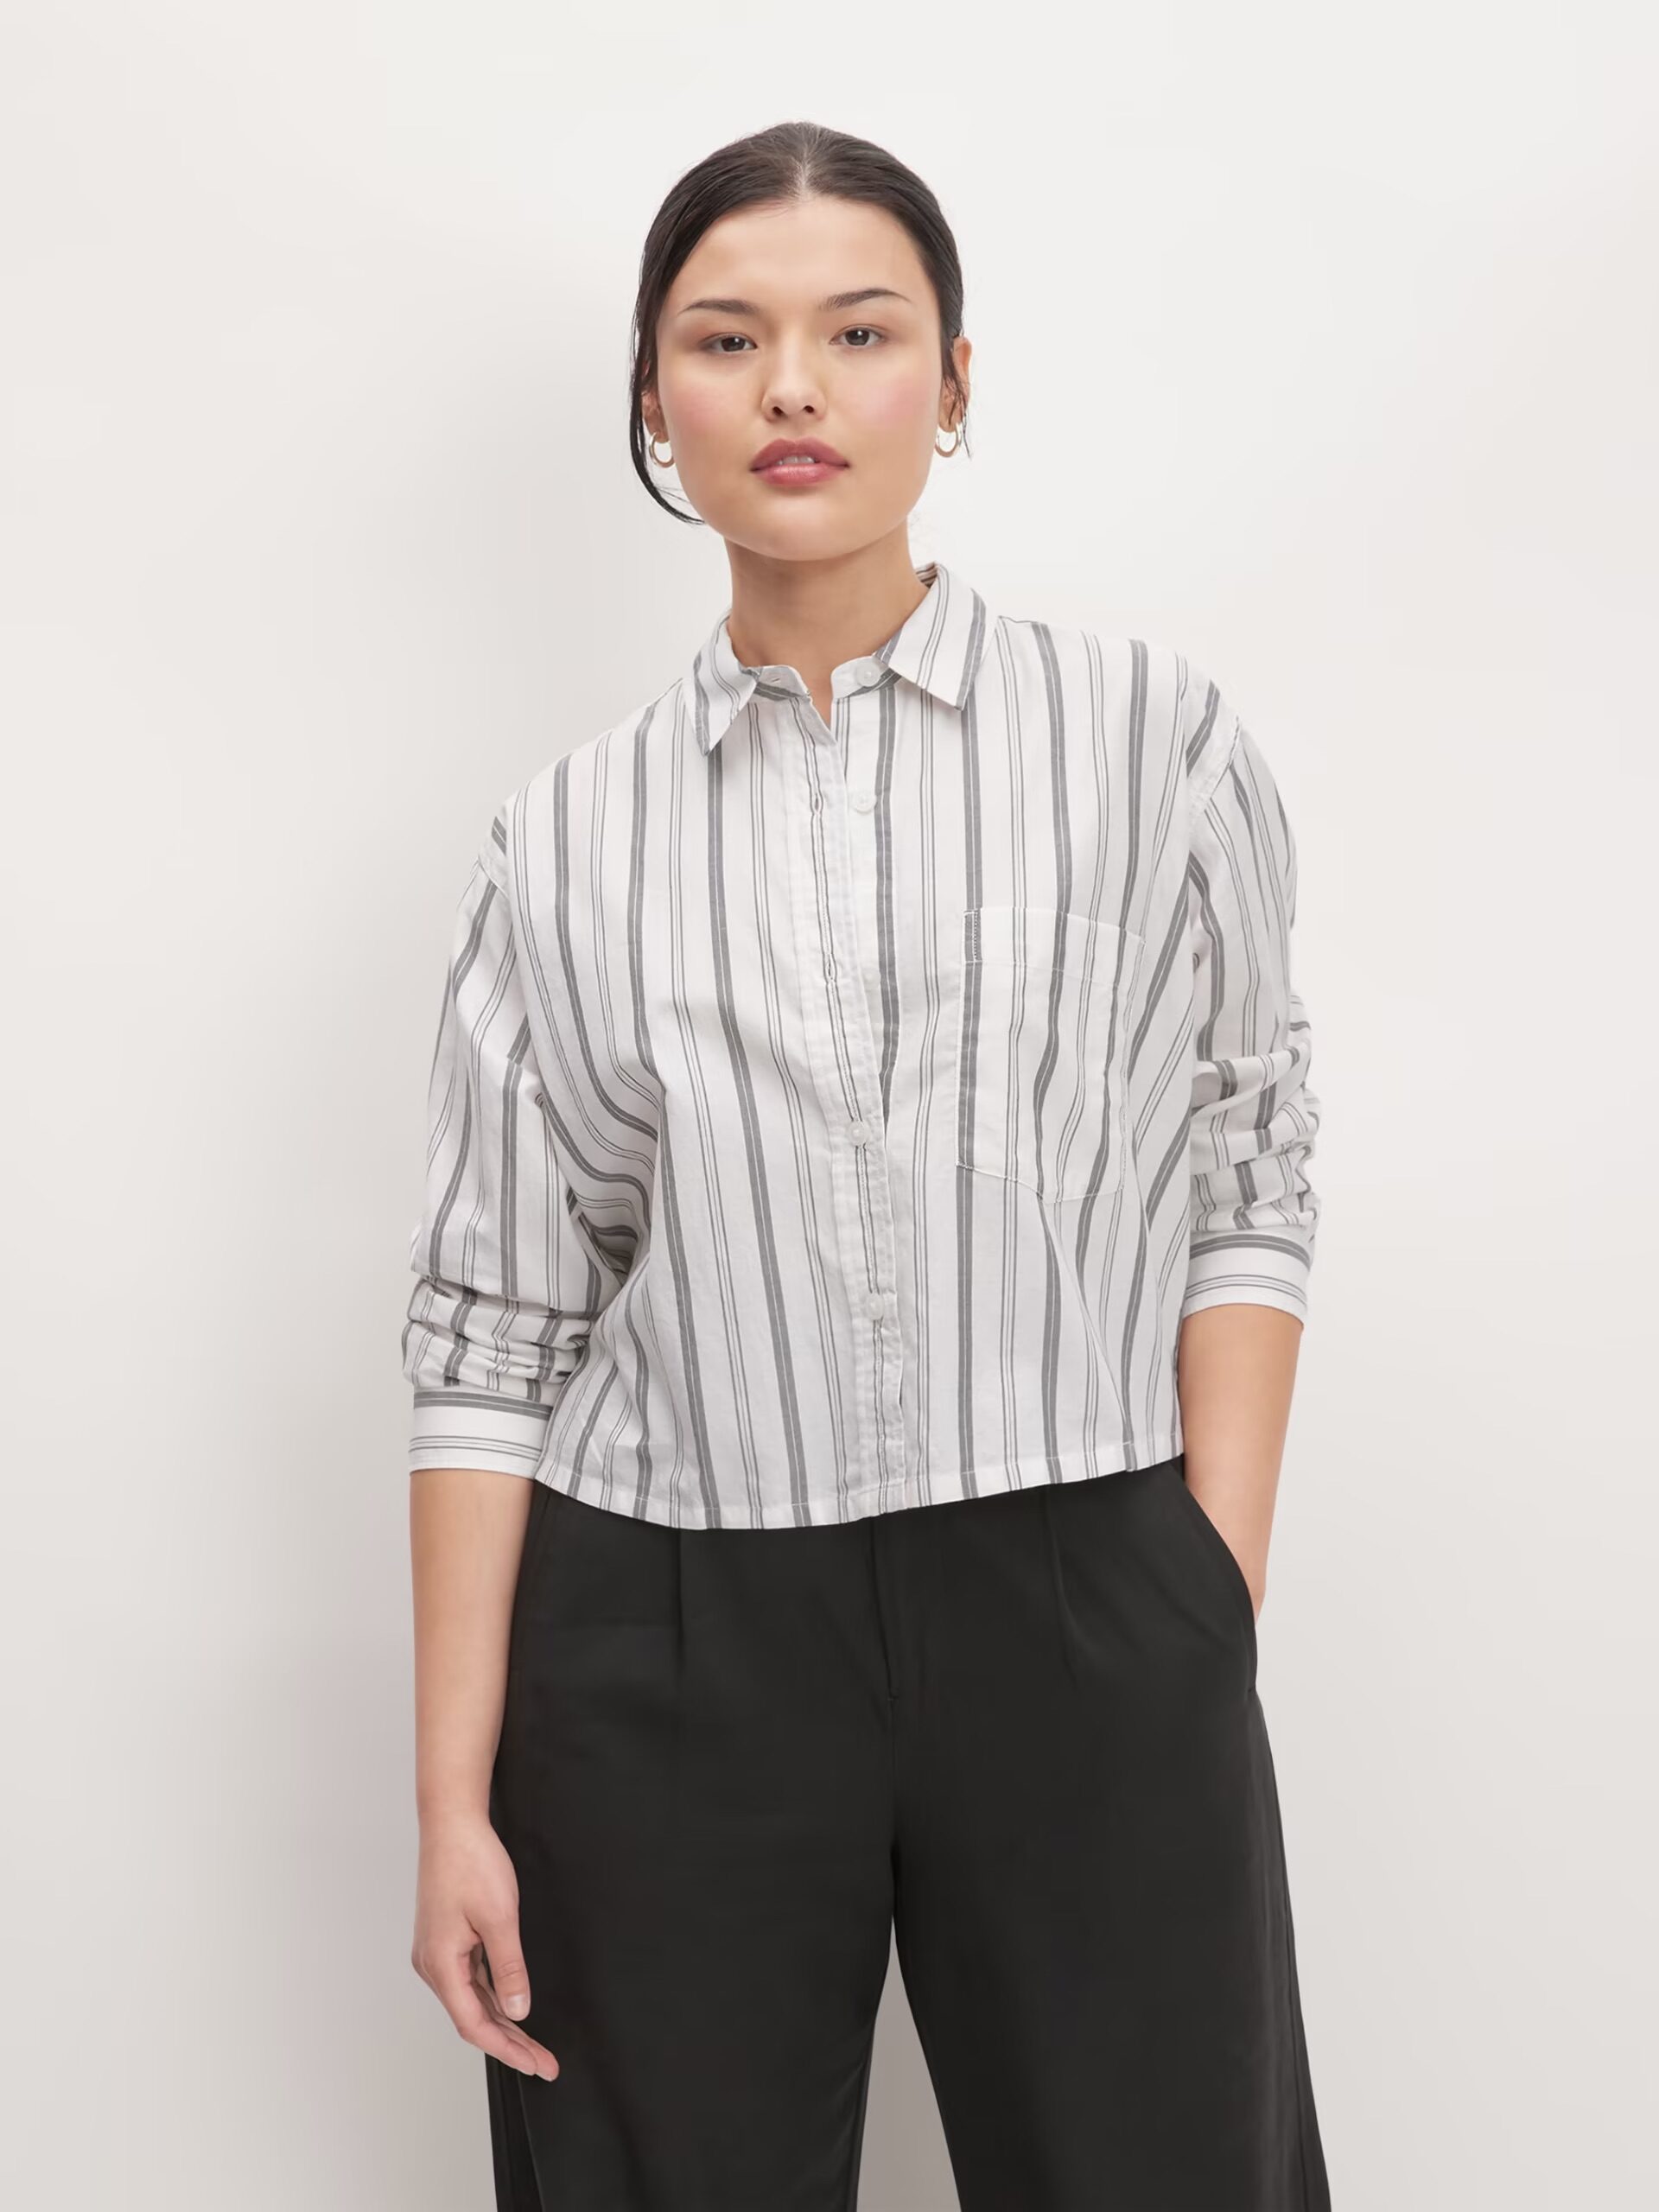 Woman posing in a striped shirt and black trousers against a white background.